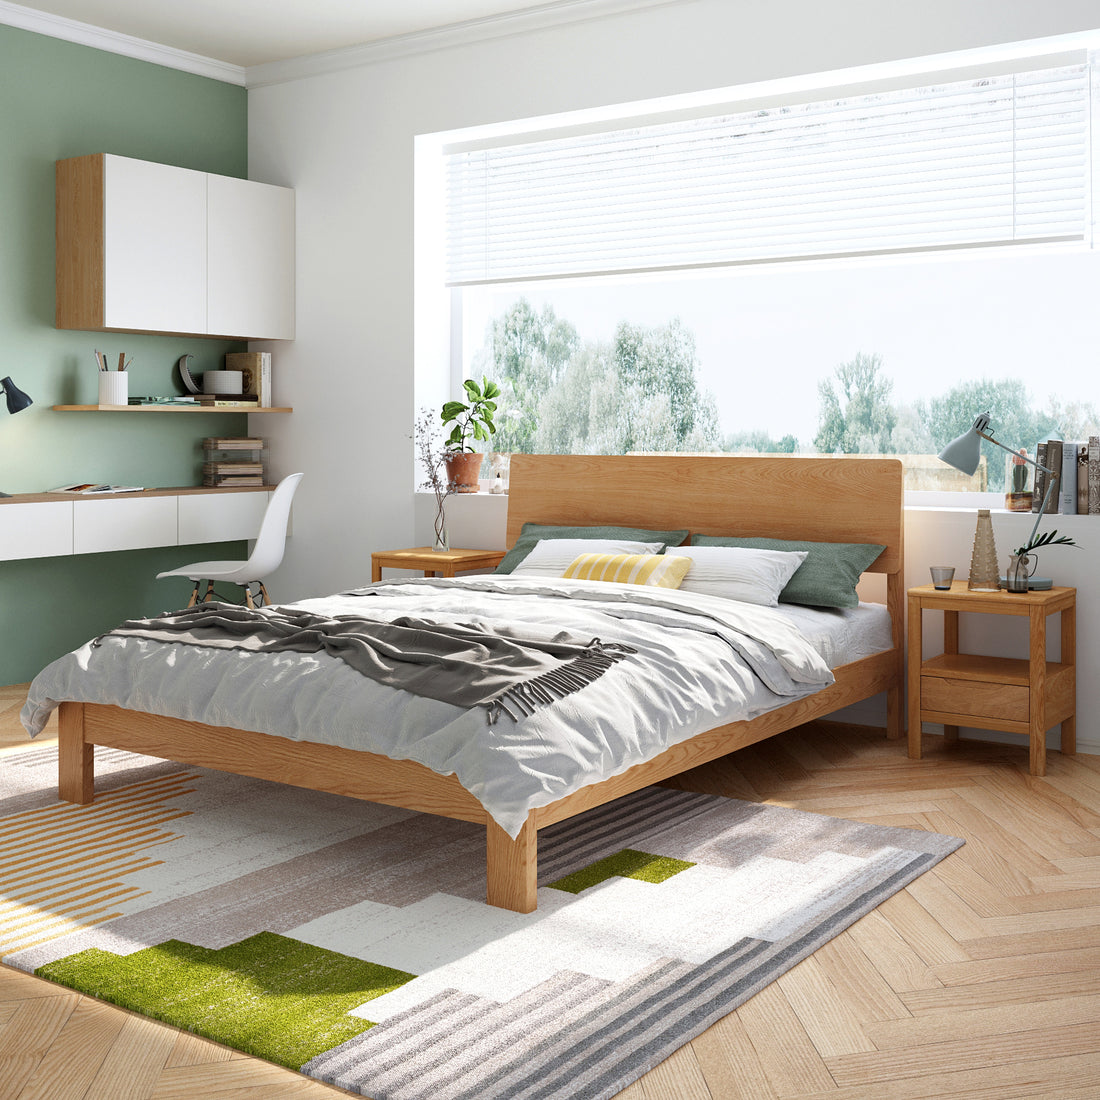 Quisara Wood Bed Frame